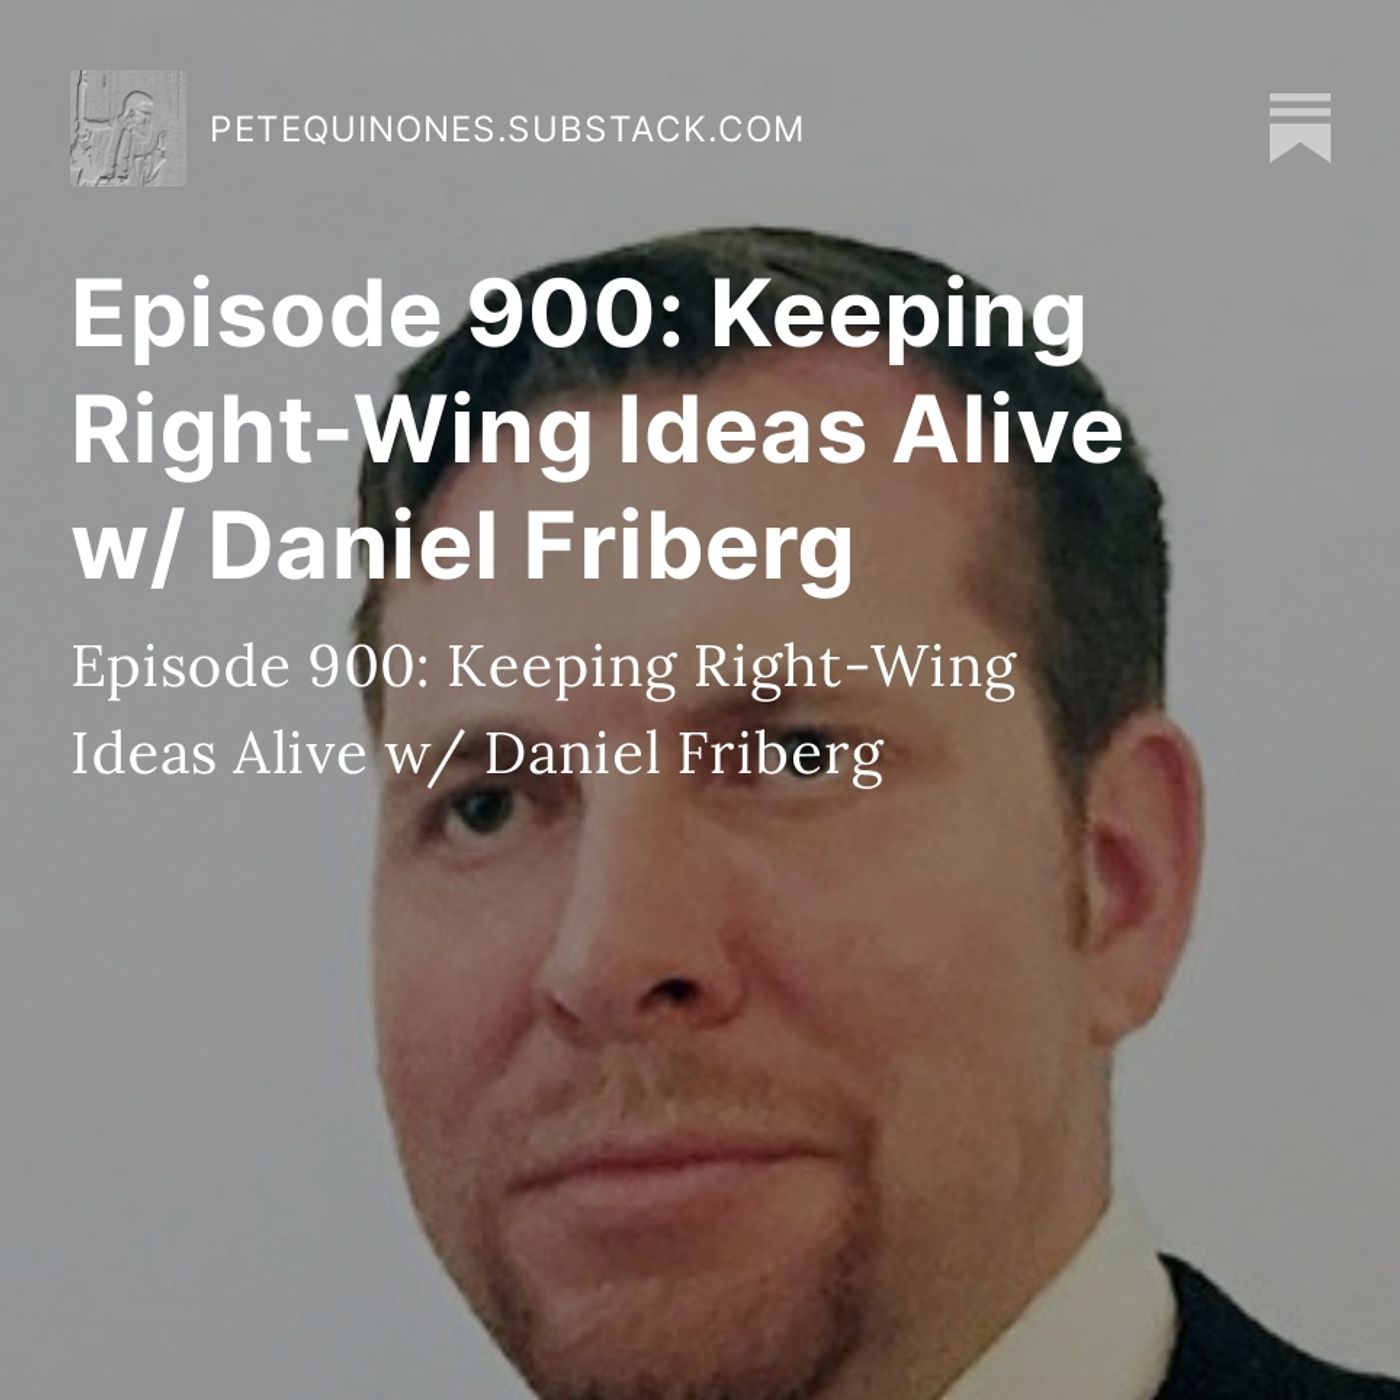 Episode 900: Keeping Right-Wing Ideas Alive w/ Daniel Friberg